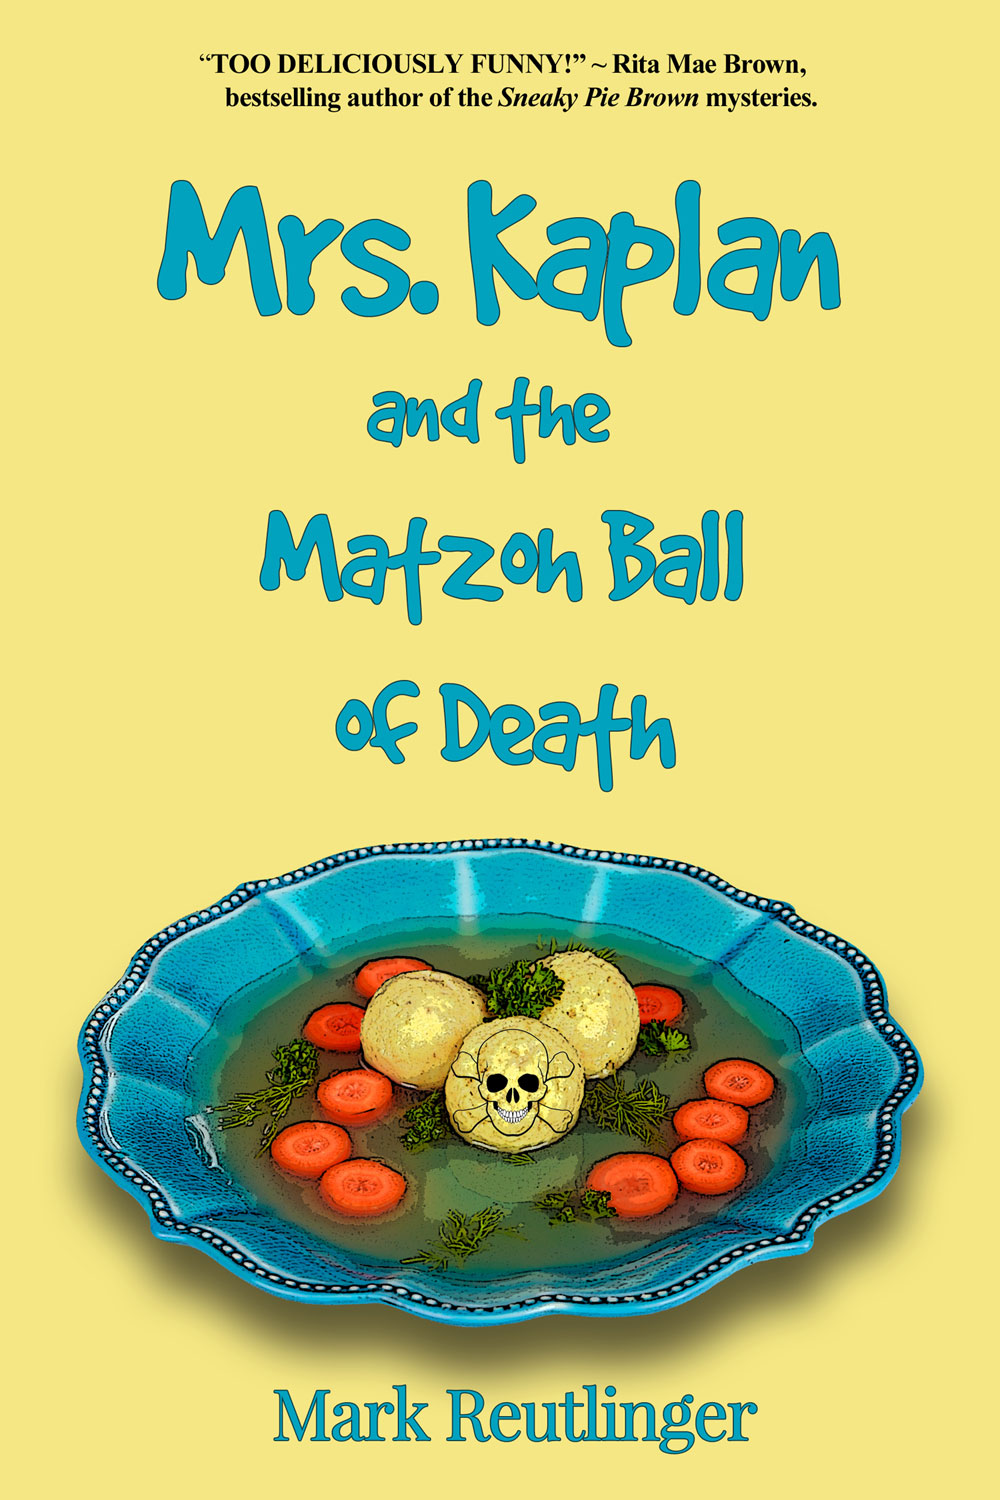 mrs kaplan and the matzoh ball of death